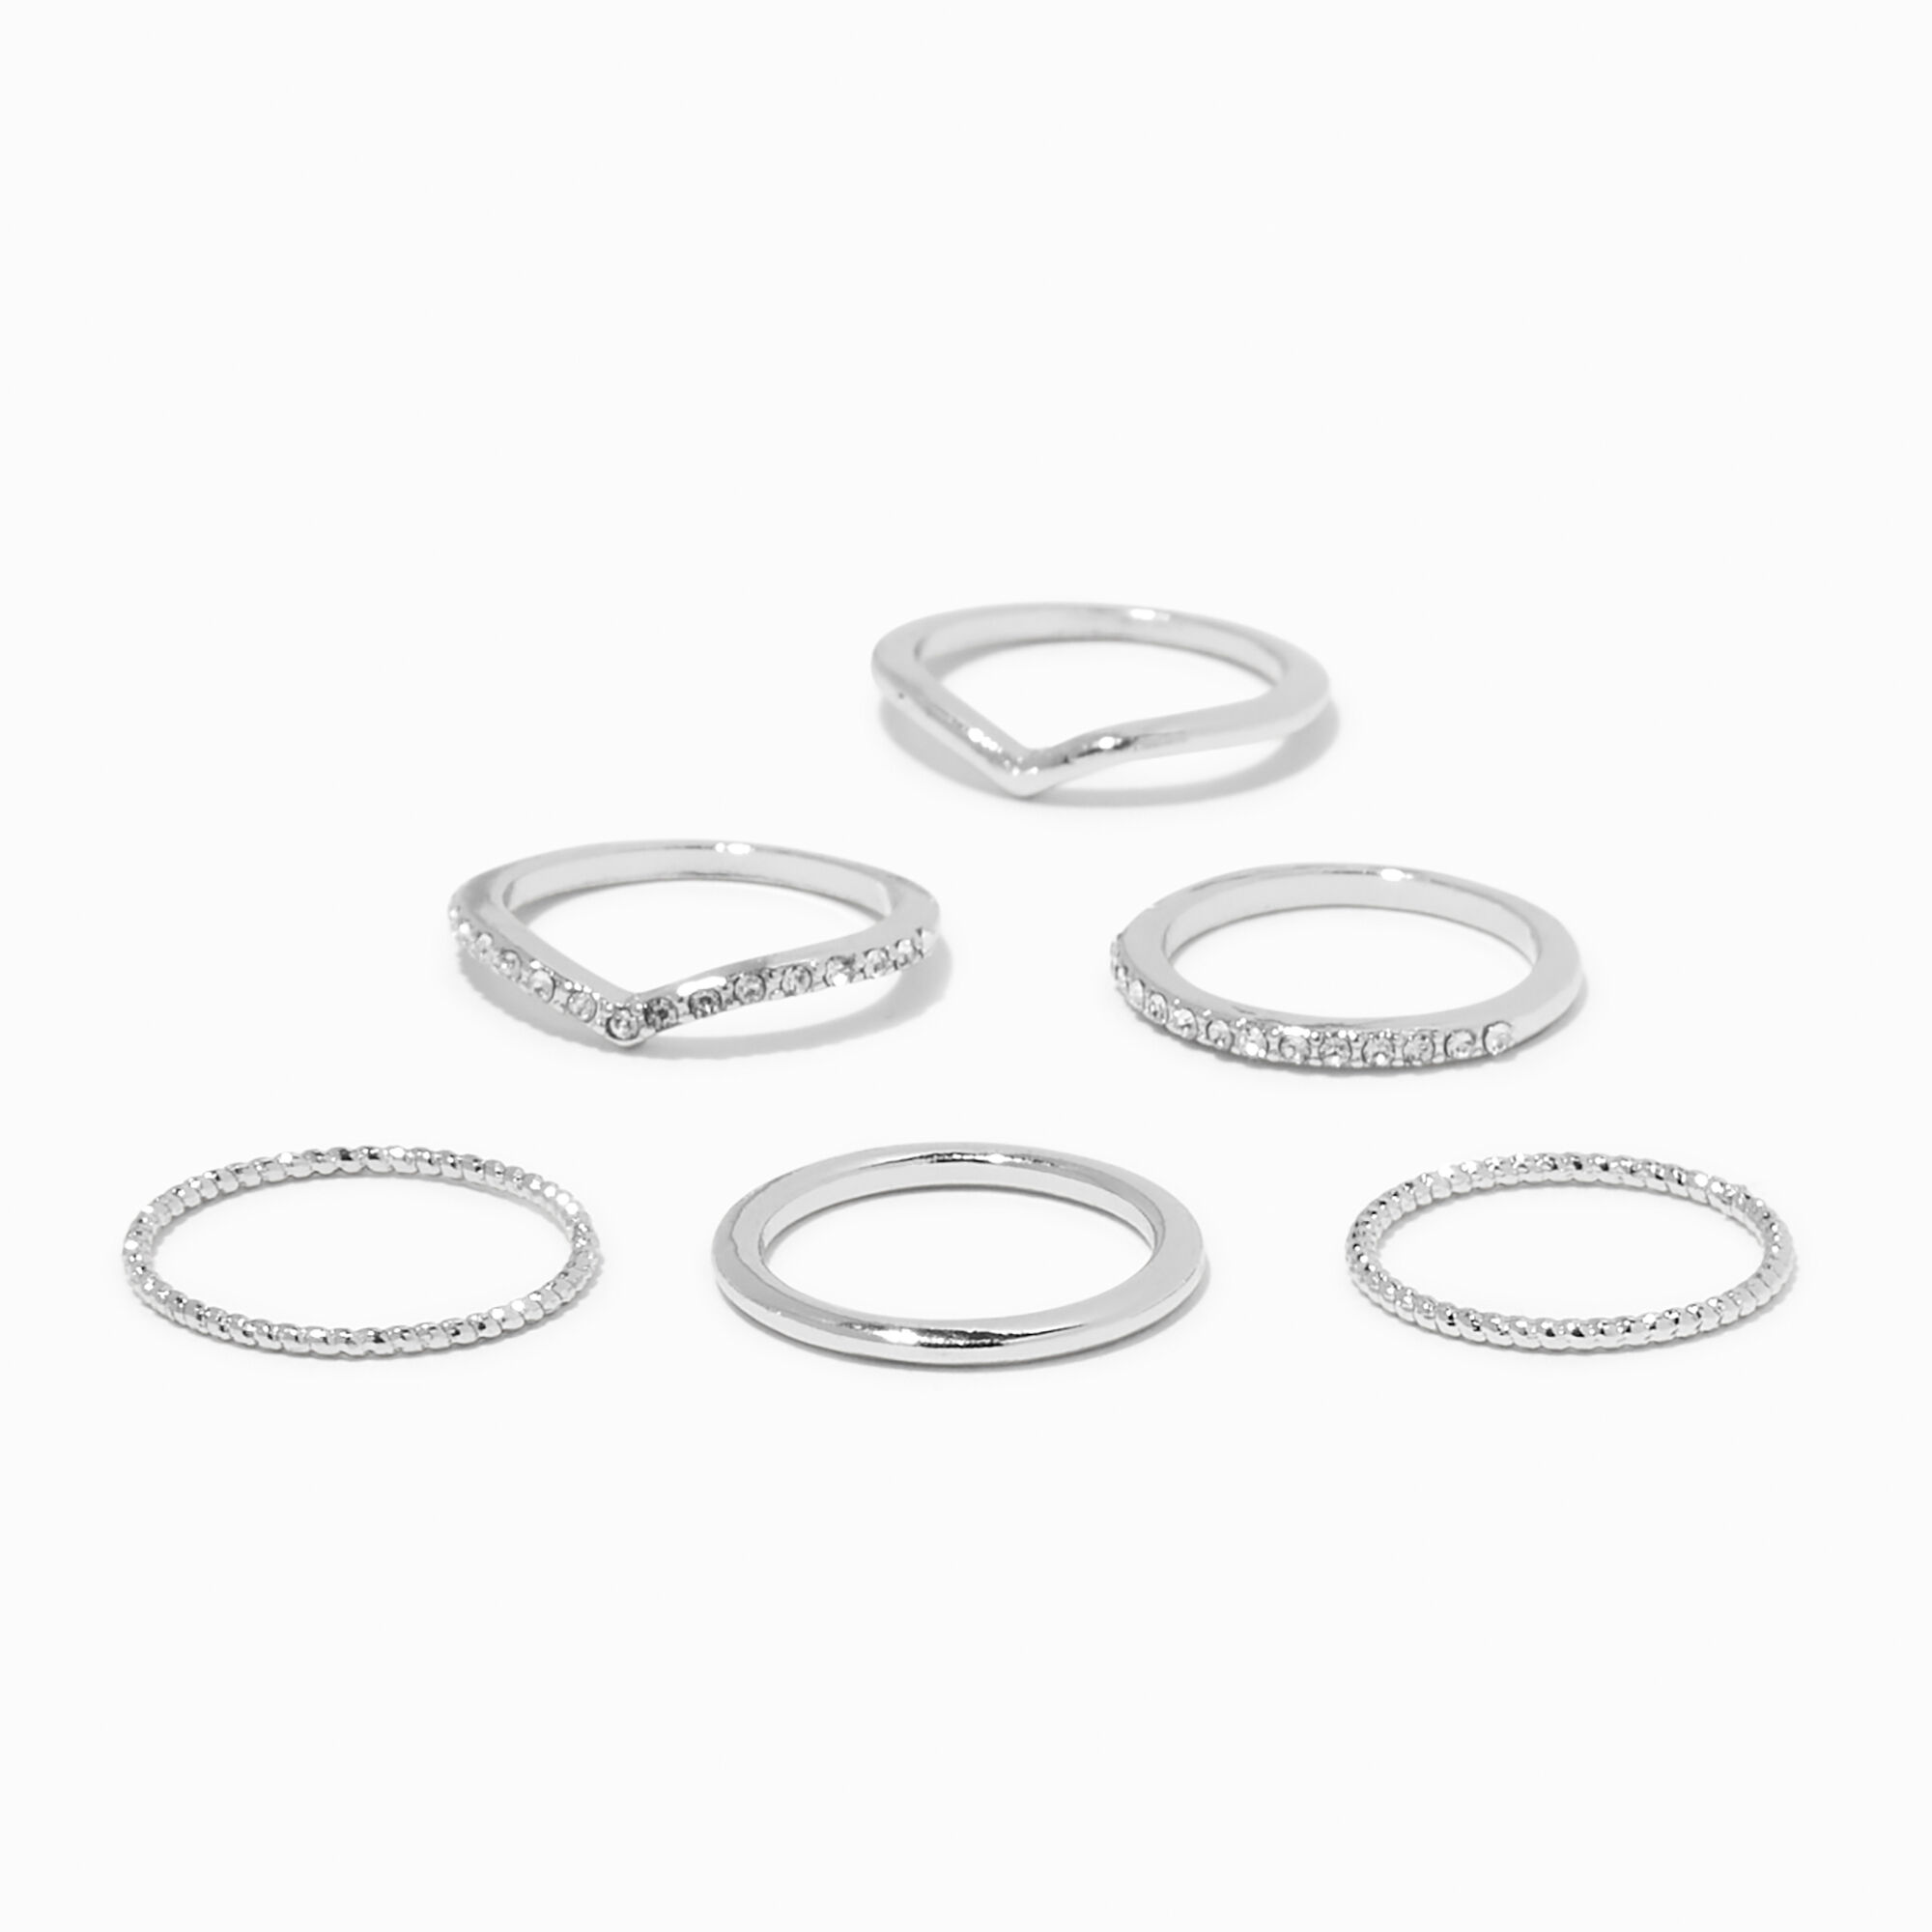 View Claires Tone Delicate Geometric Rings 6 Pack Silver information